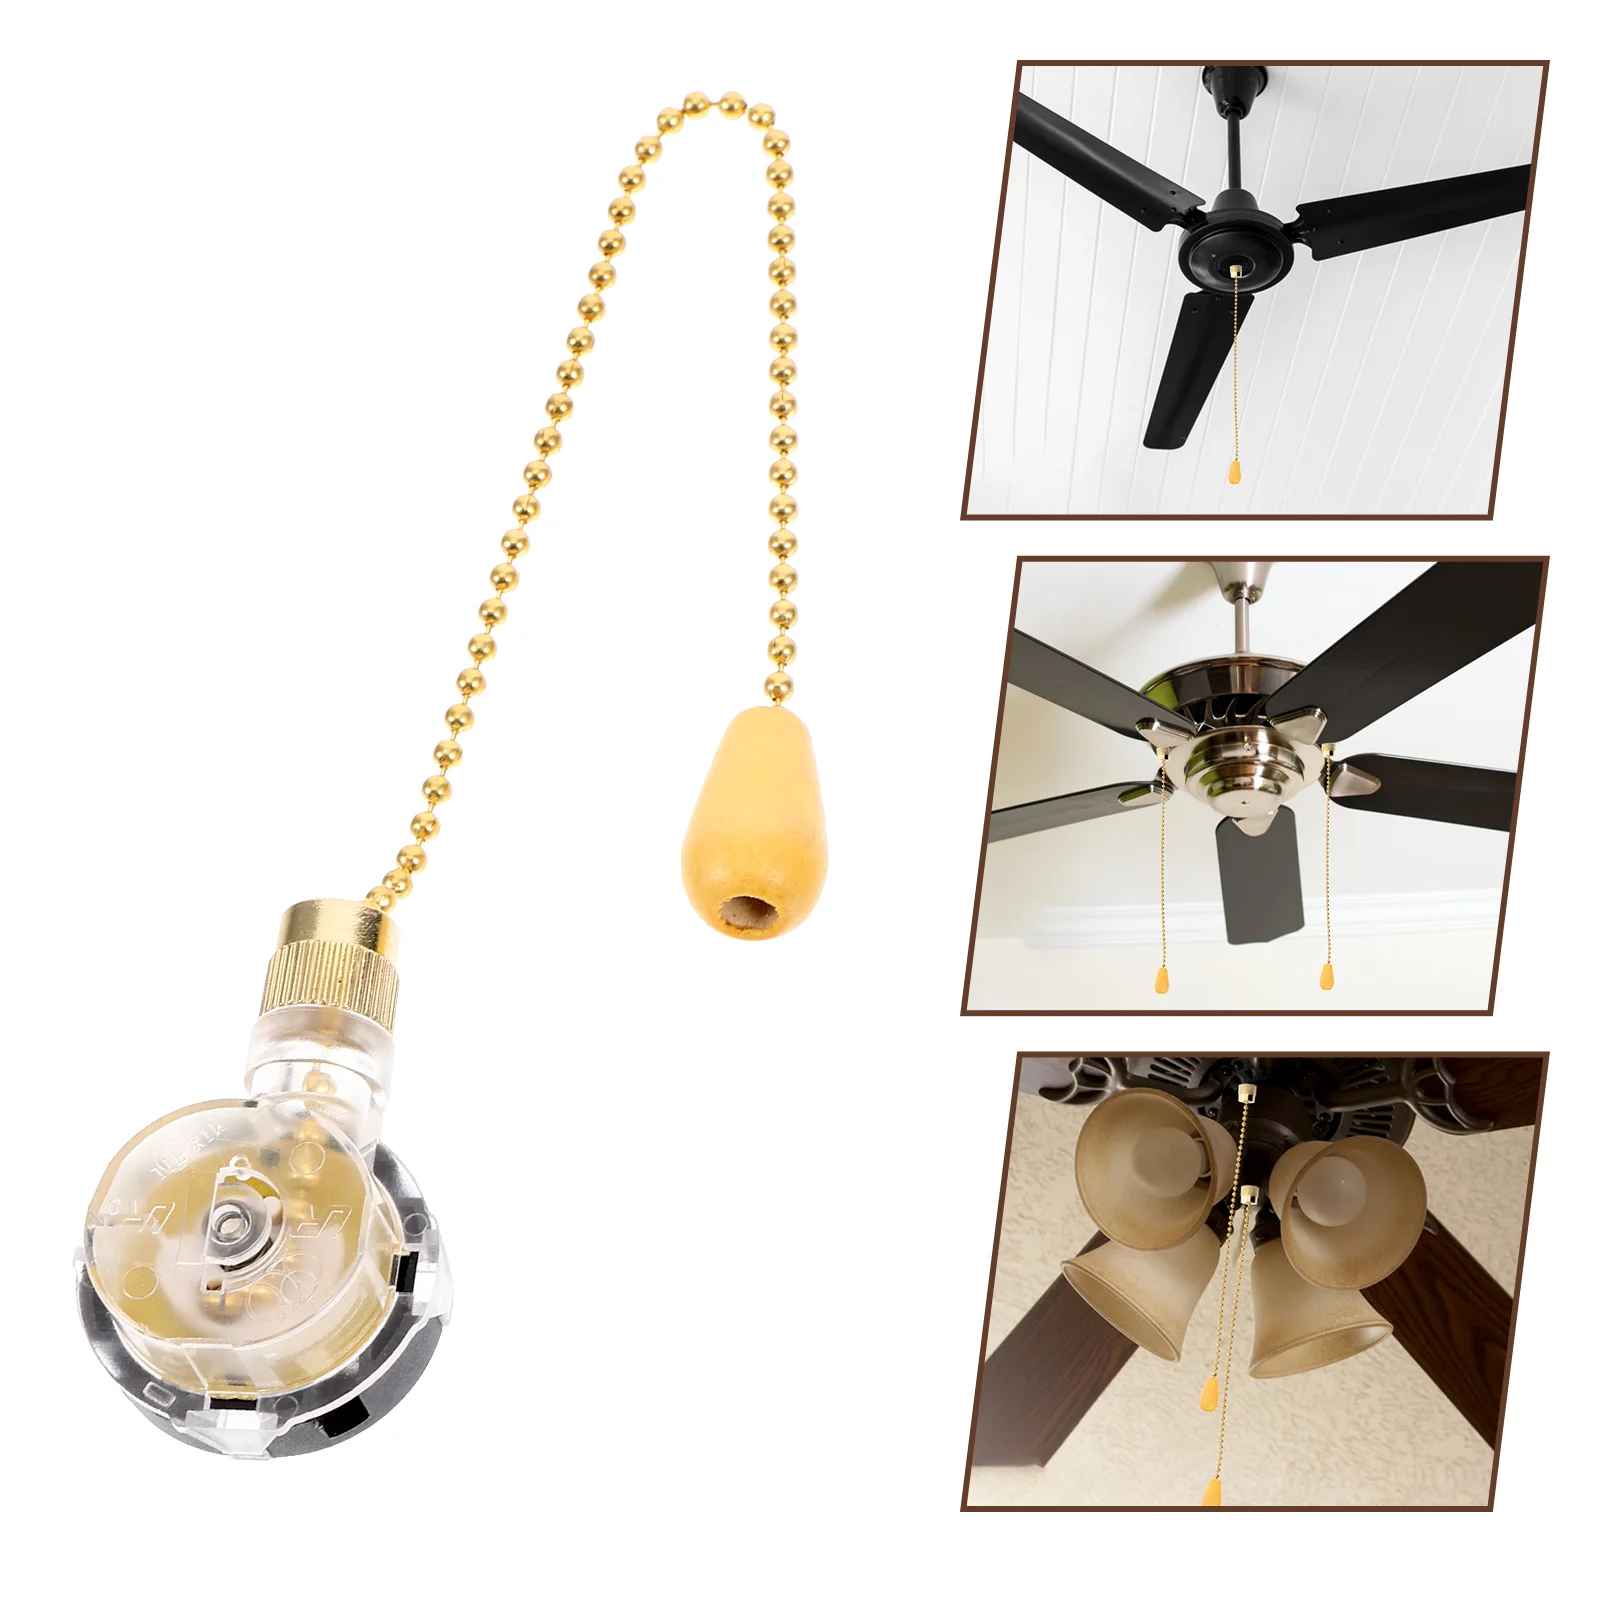 

Ceiling Light Decorative Fan Pull Chain Fans And Accessories Extender Lamp Pulling Chains Extension Pulls